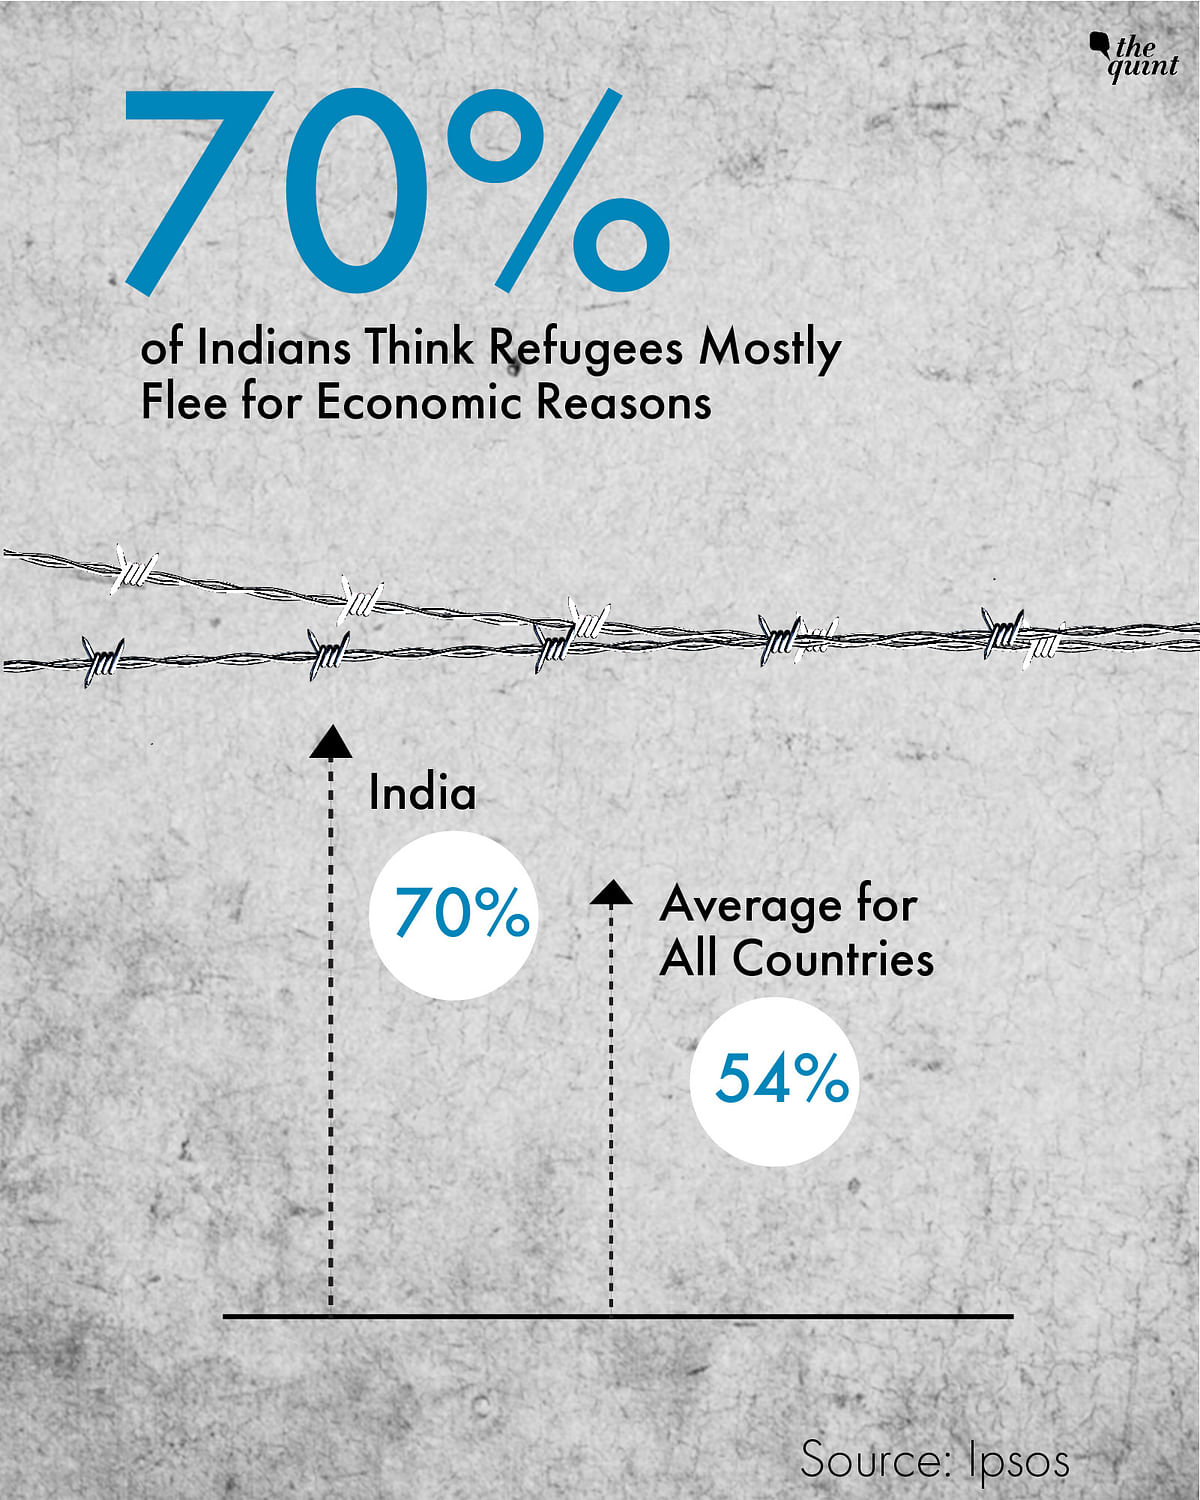 Research firm Ipsos has come out with a survey report on perception regarding refugees to mark World Refugee Day. 